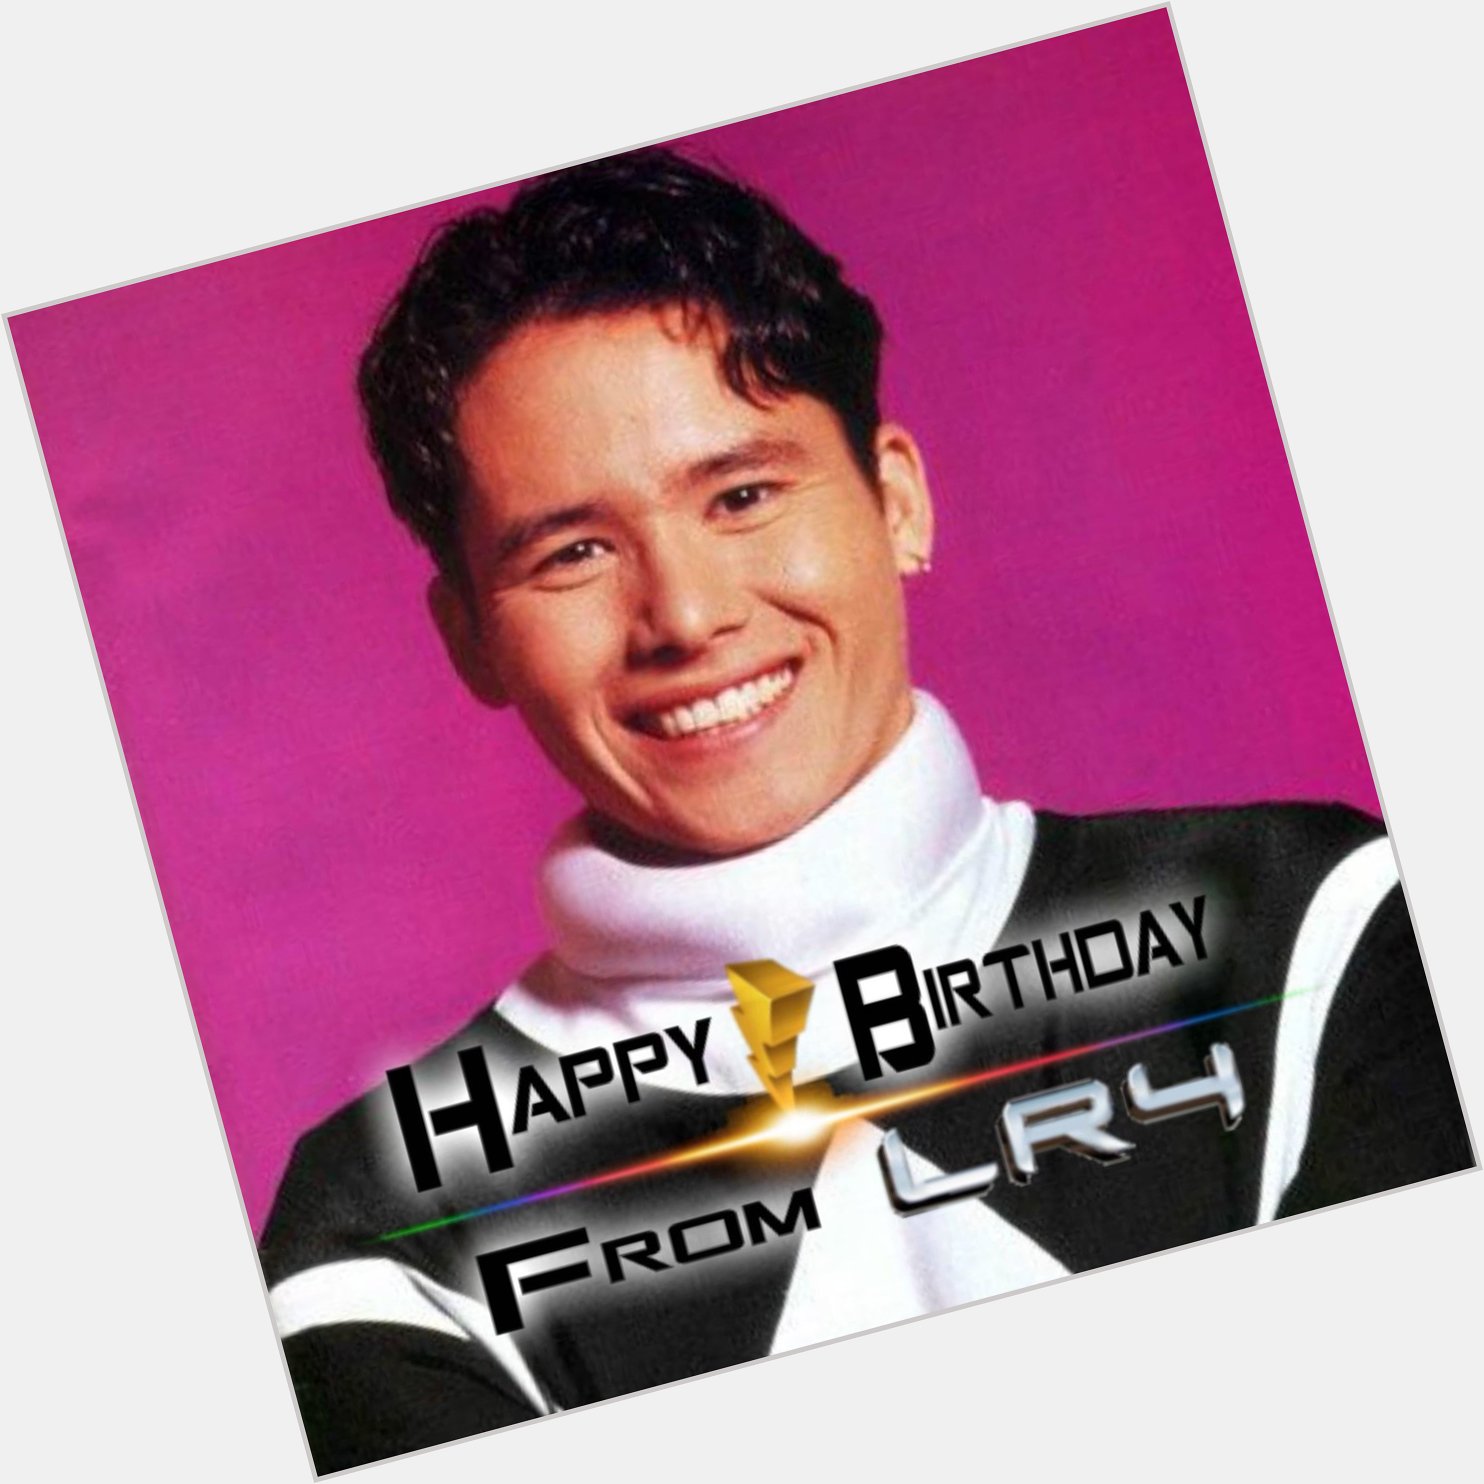 LR4 would like to wish Johnny Yong Bosch a Happy Birthday! 